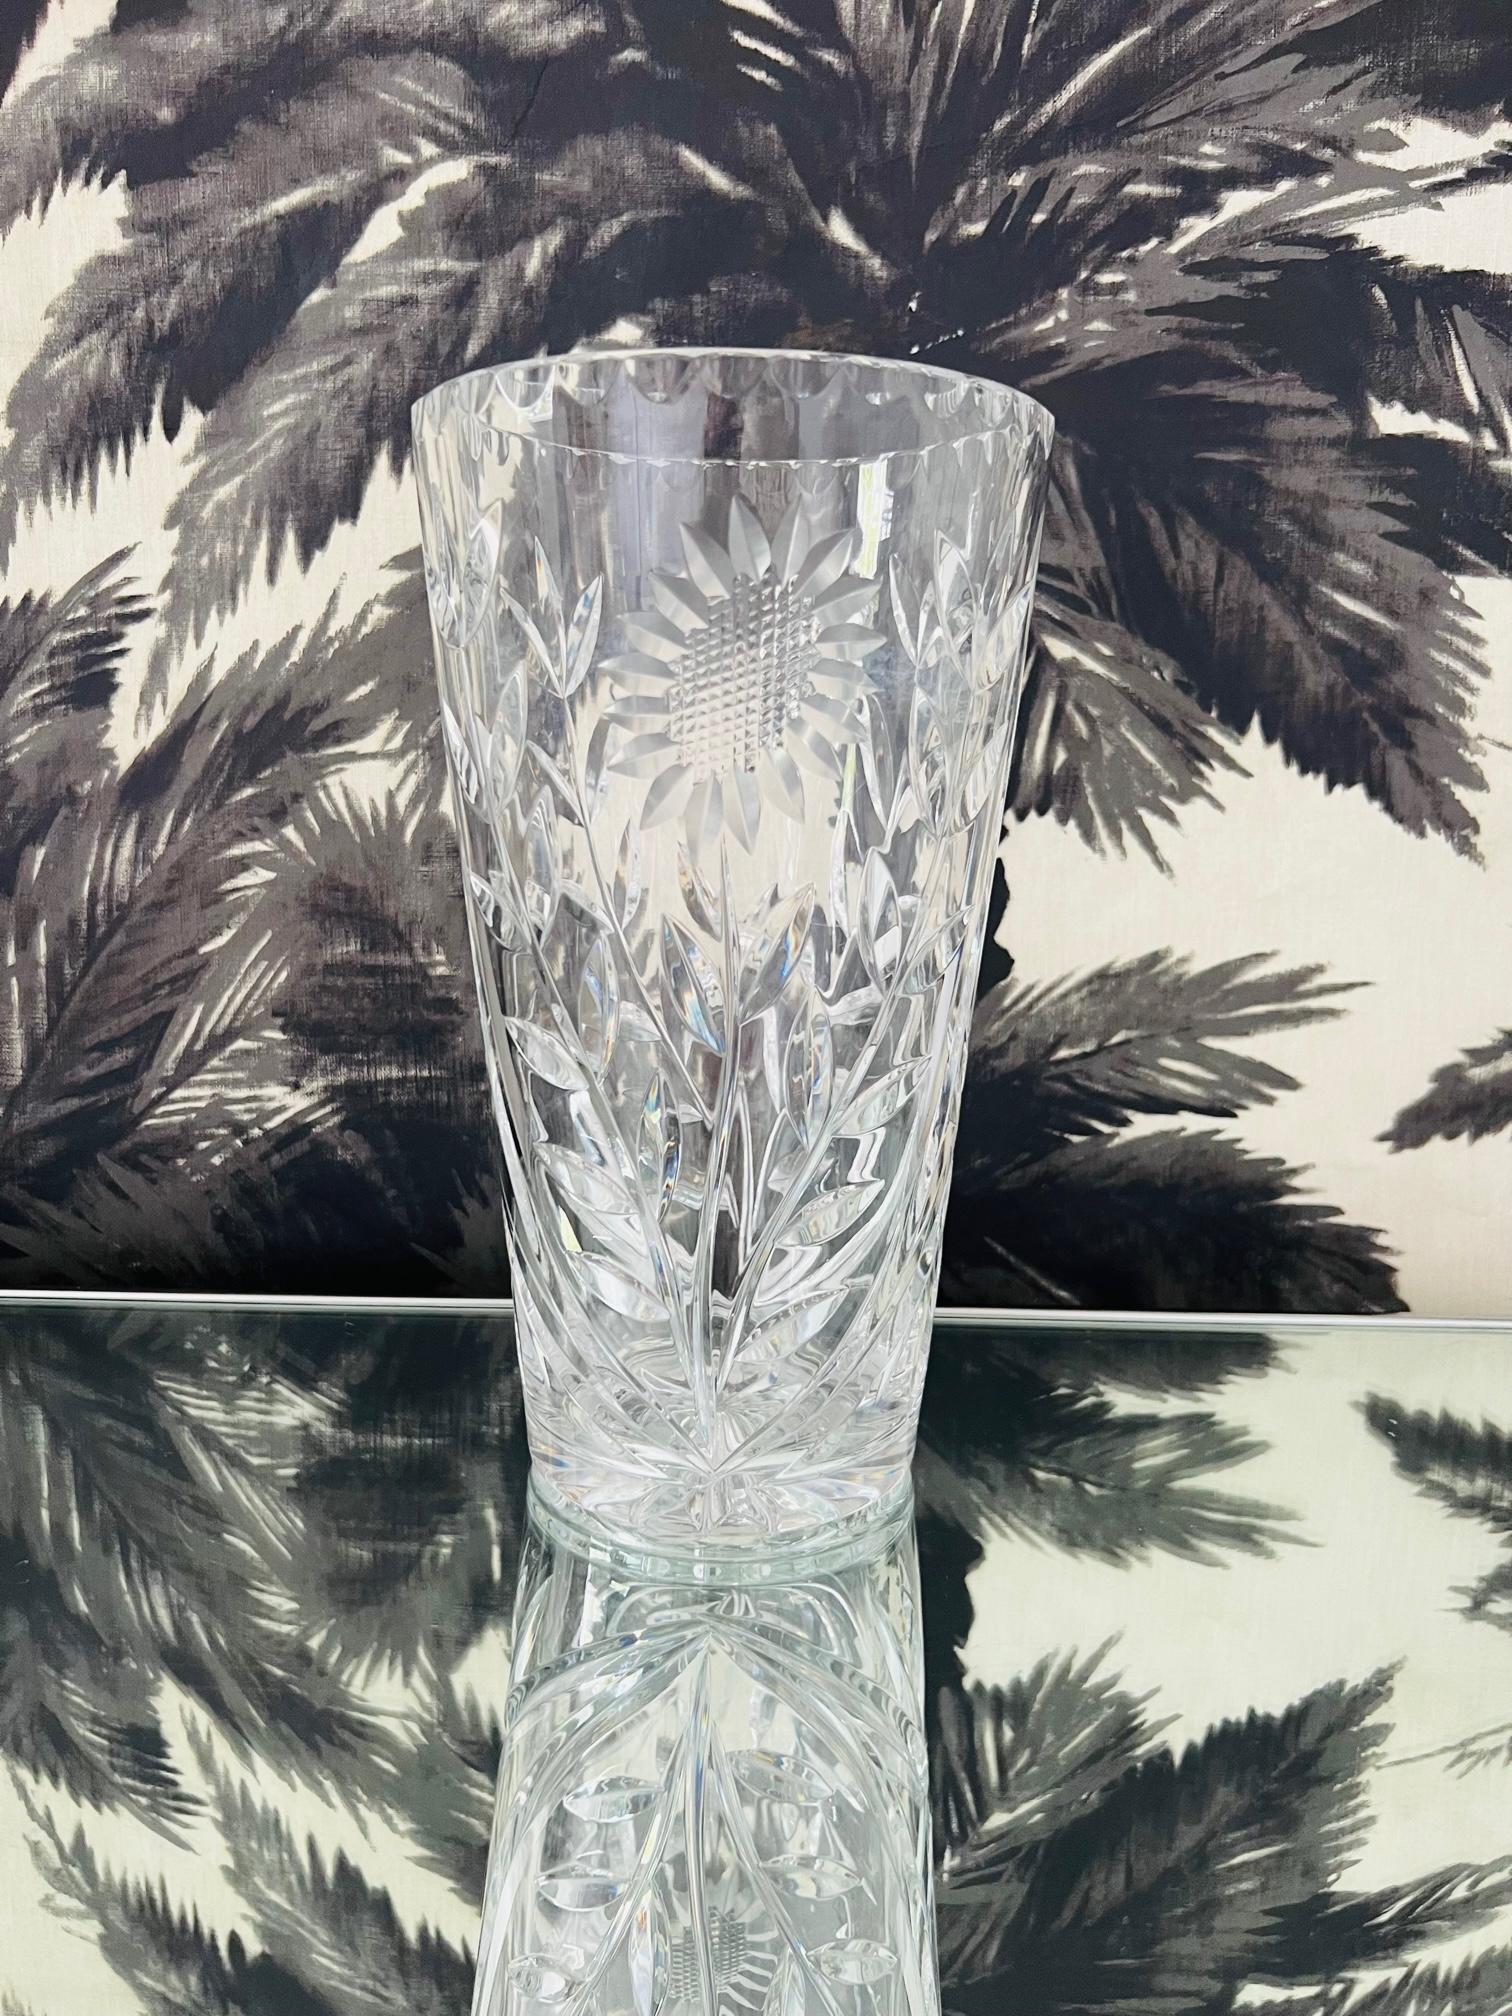 Art Deco Waterford Crystal Etched Sunflower Vase with Cut Glass Designs, England, c. 2010 For Sale